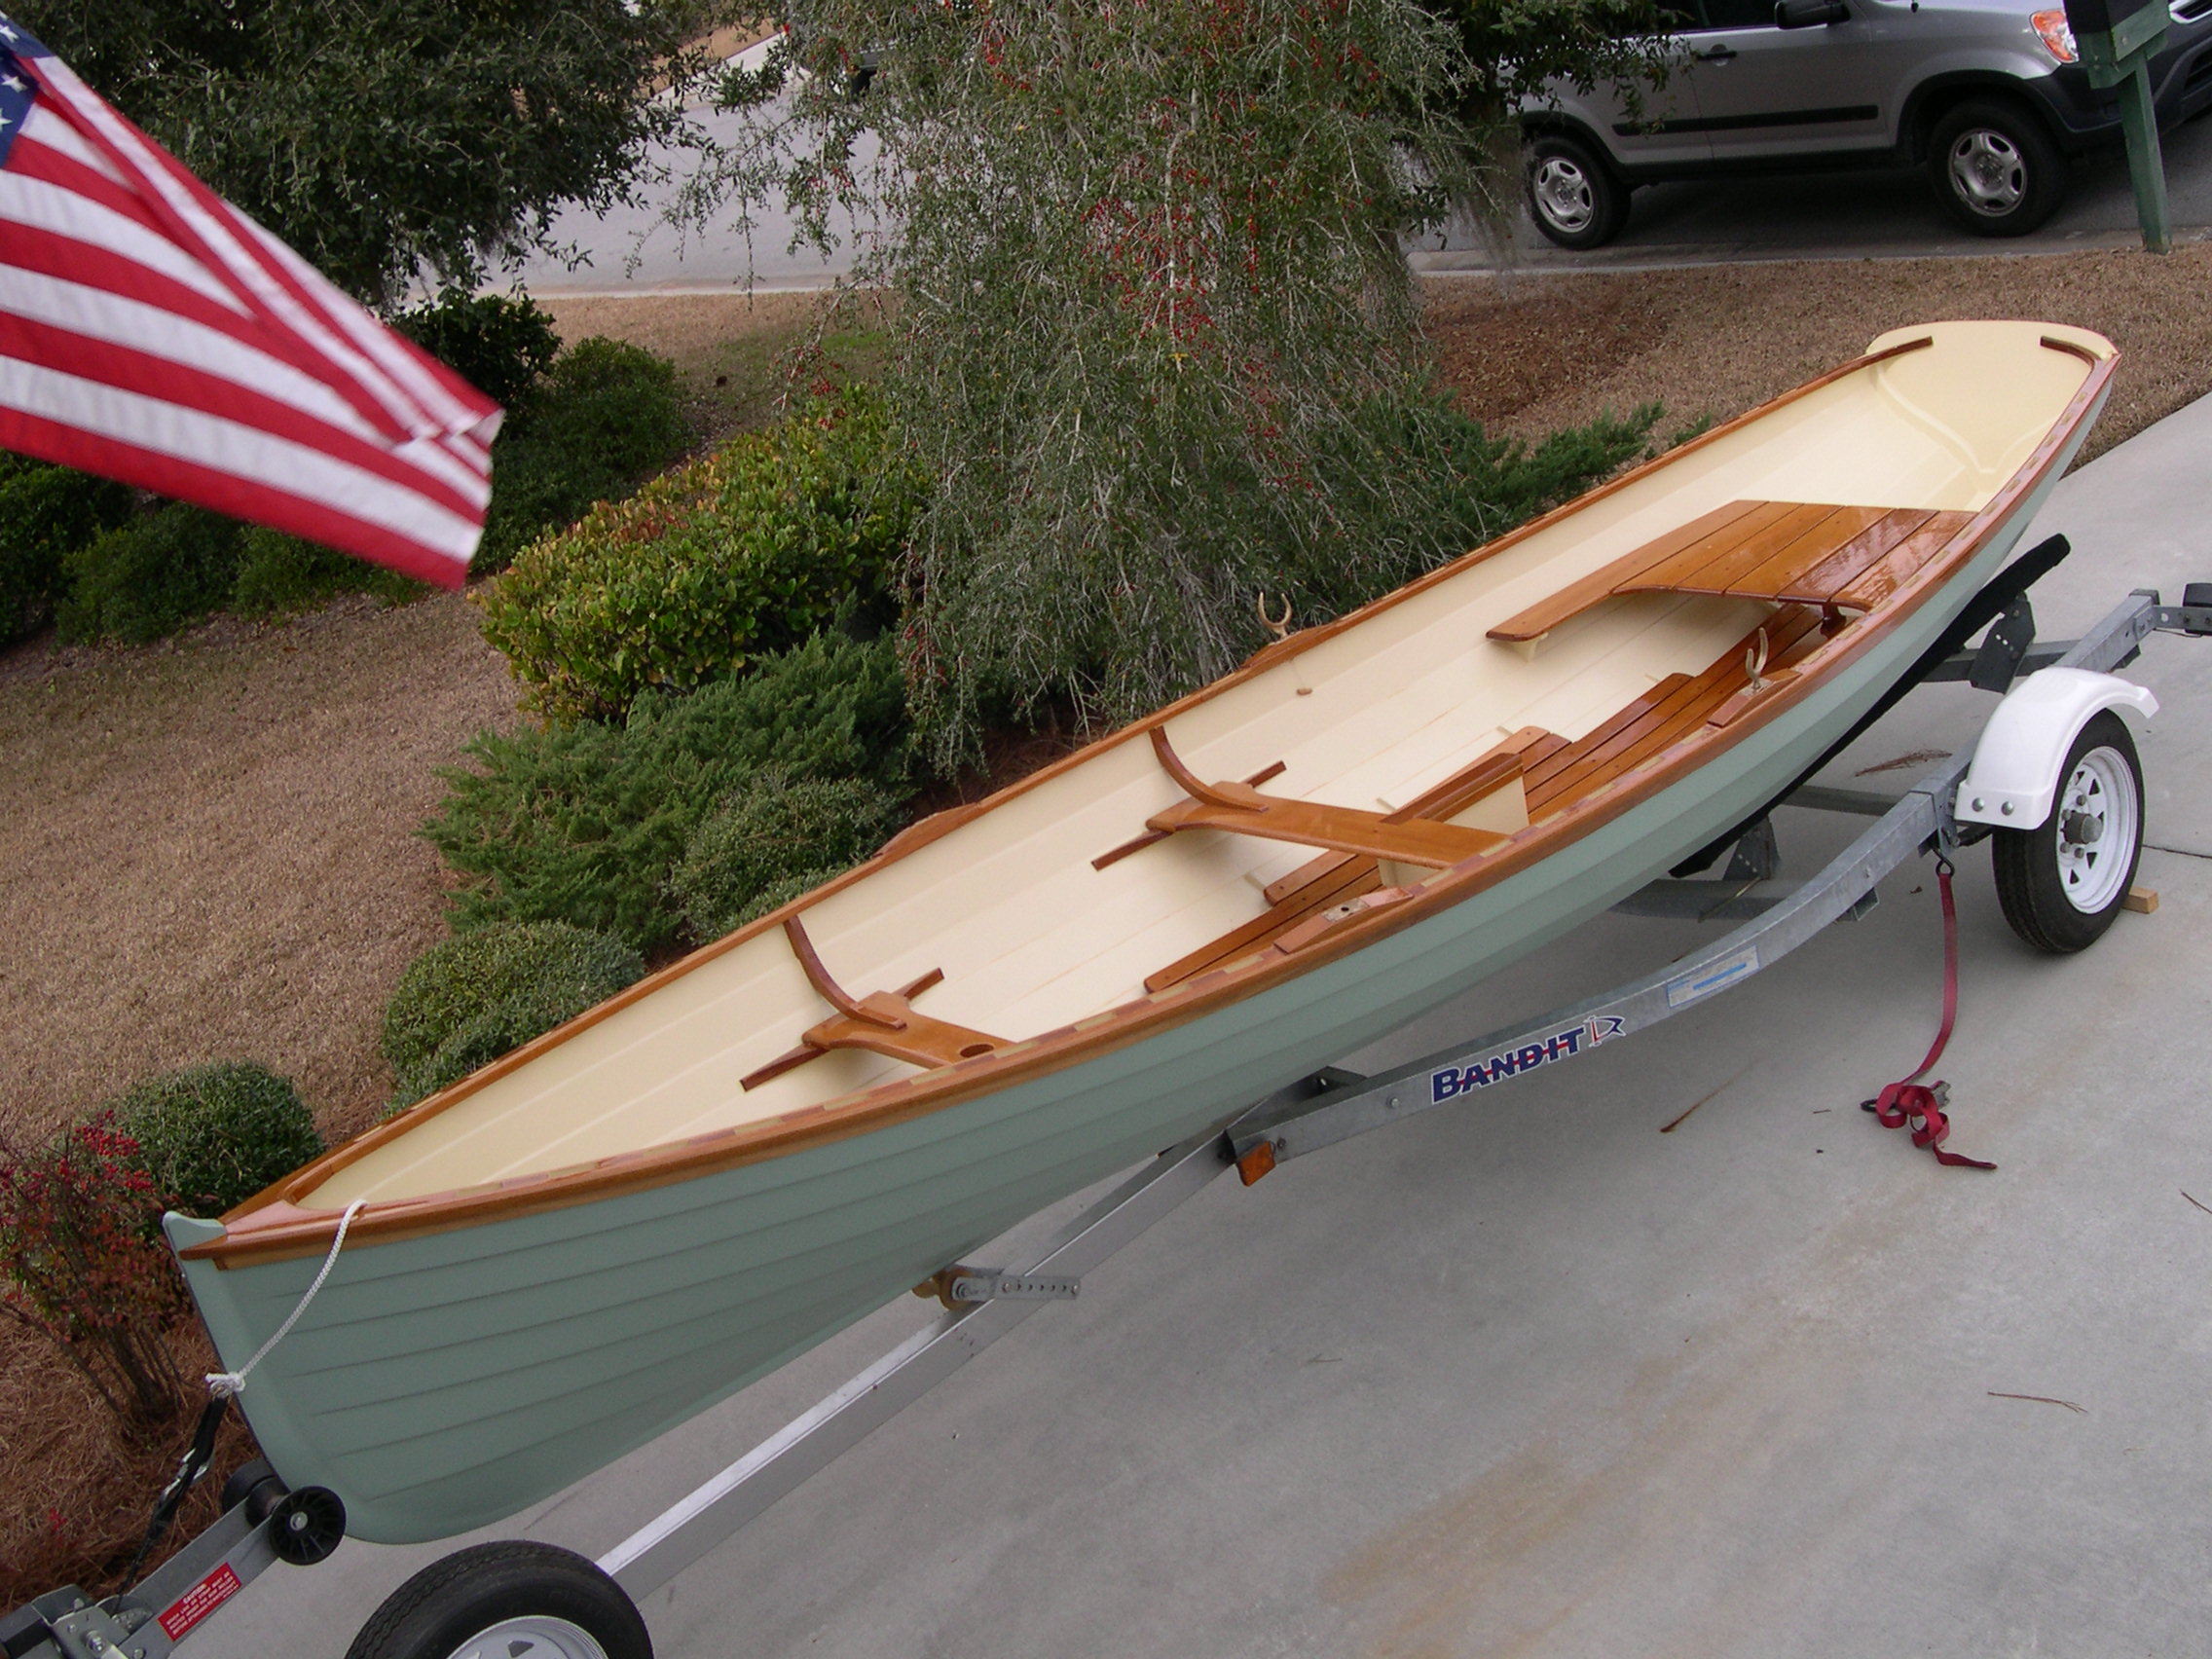 Seeking plans for modified Adirondack Guide Boat/Heritage 18